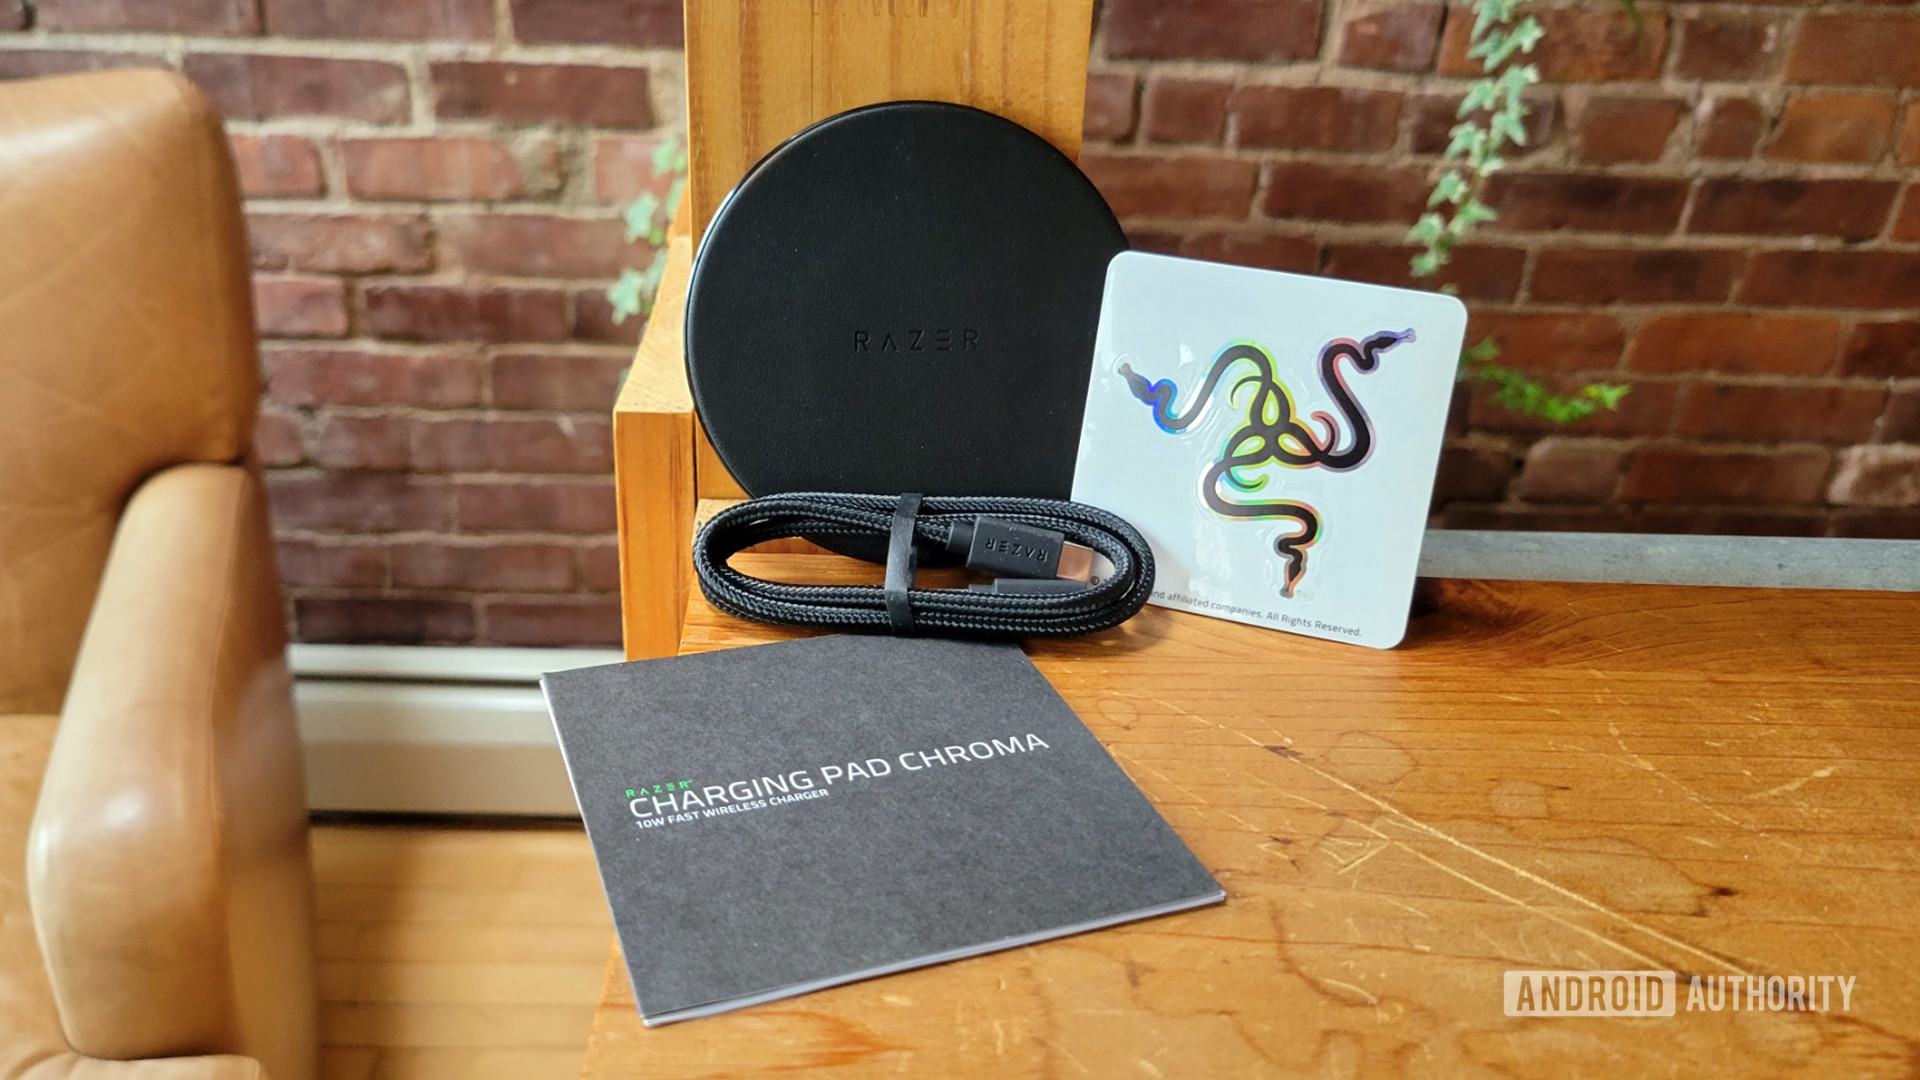 Razer Charging Pad Chroma Review In Box Contents